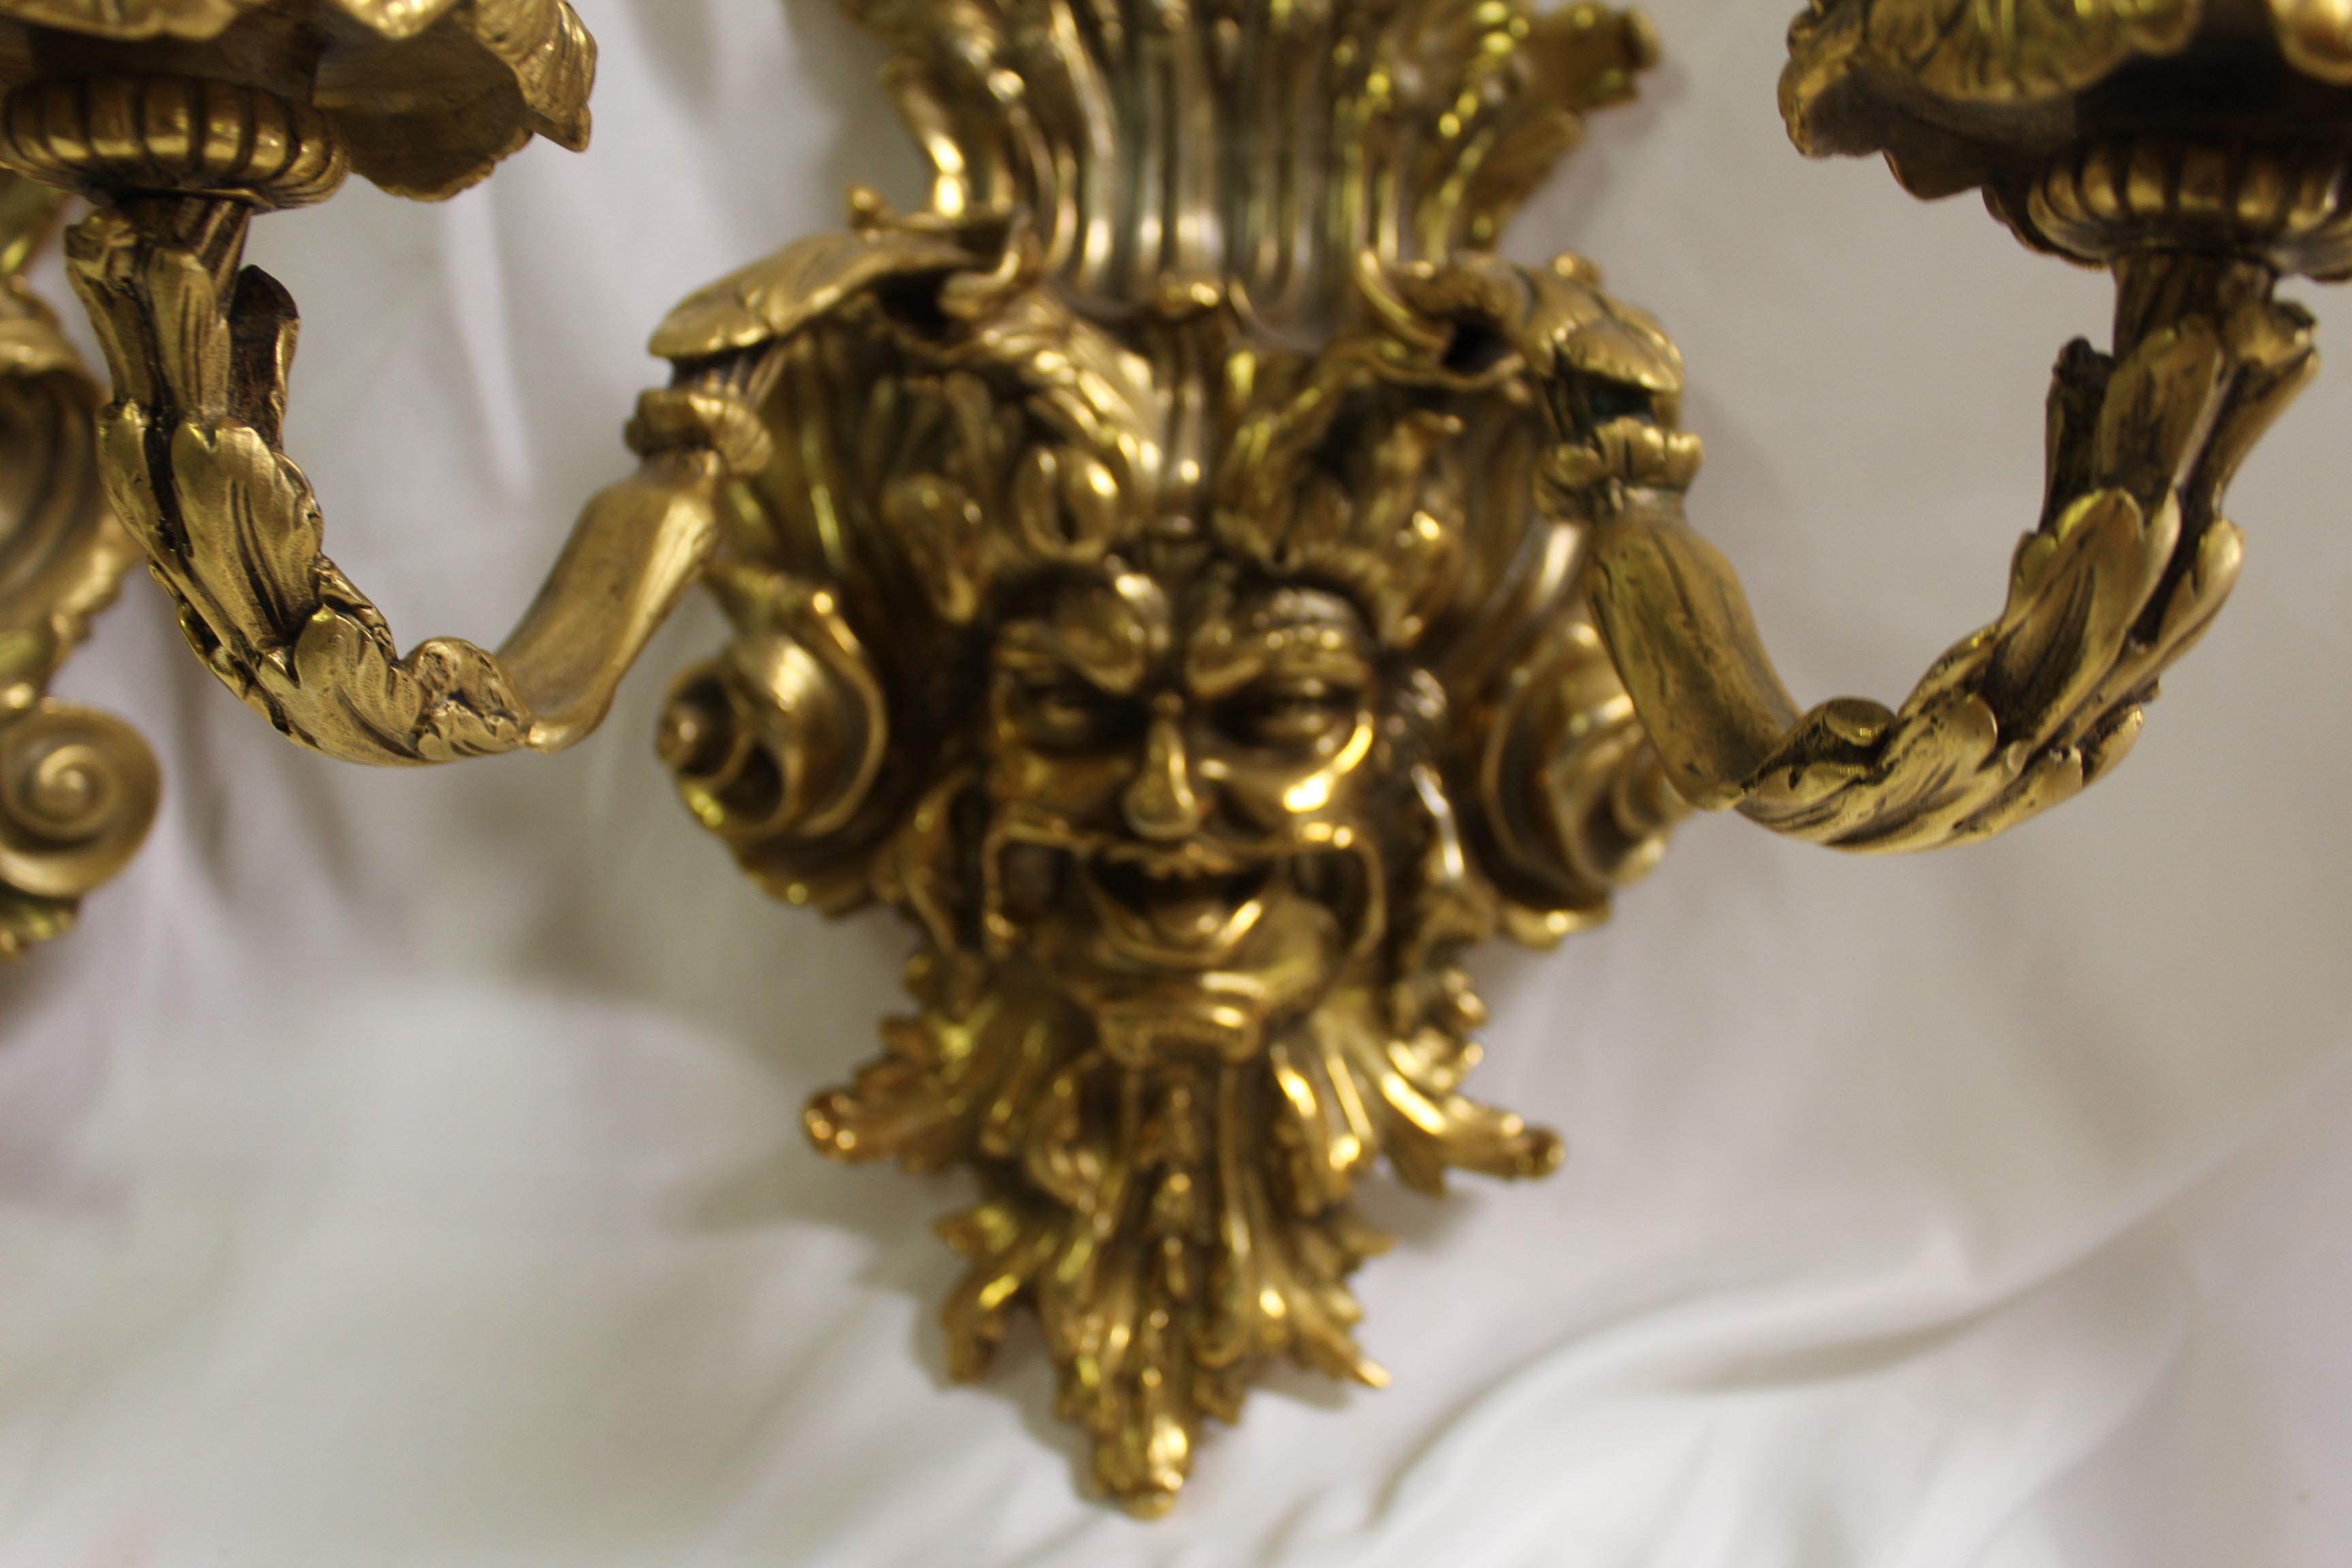 Empire Revival Empire Sconces W Grotesque Man's Face, Gold Finish, After Empire 2 Arms For Sale